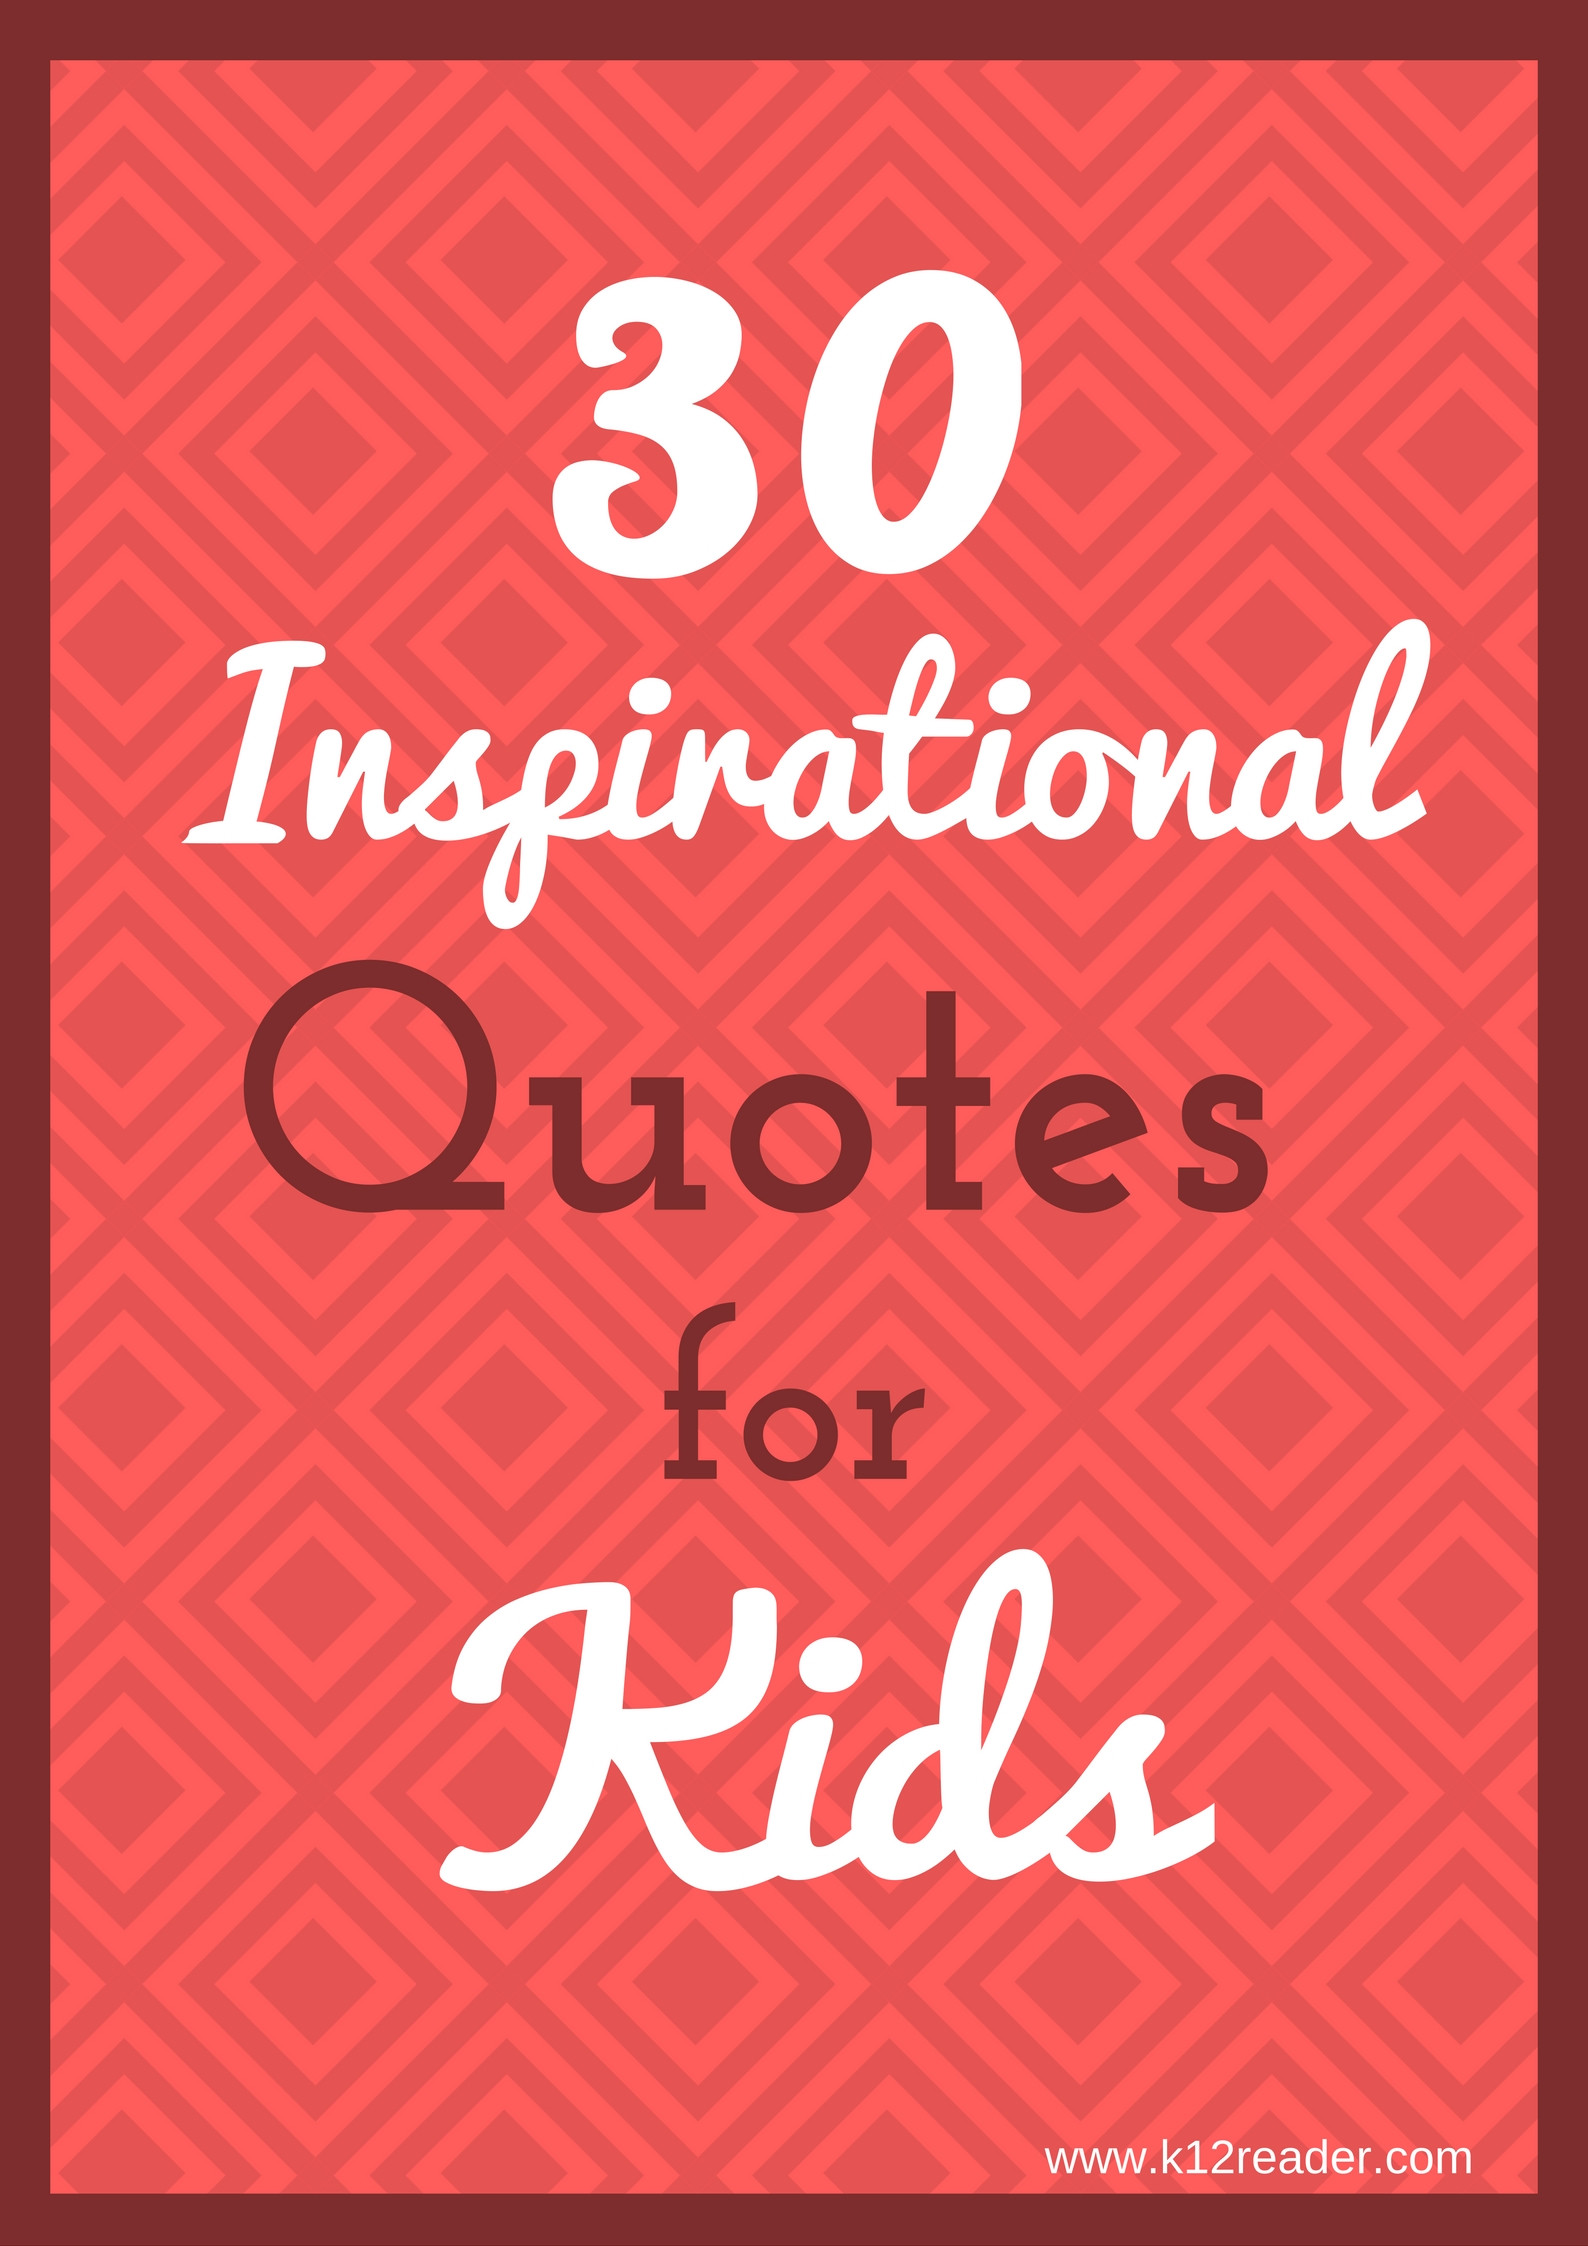 Inspirational Kids Quotes
 30 Inspirational Quotes for Kids